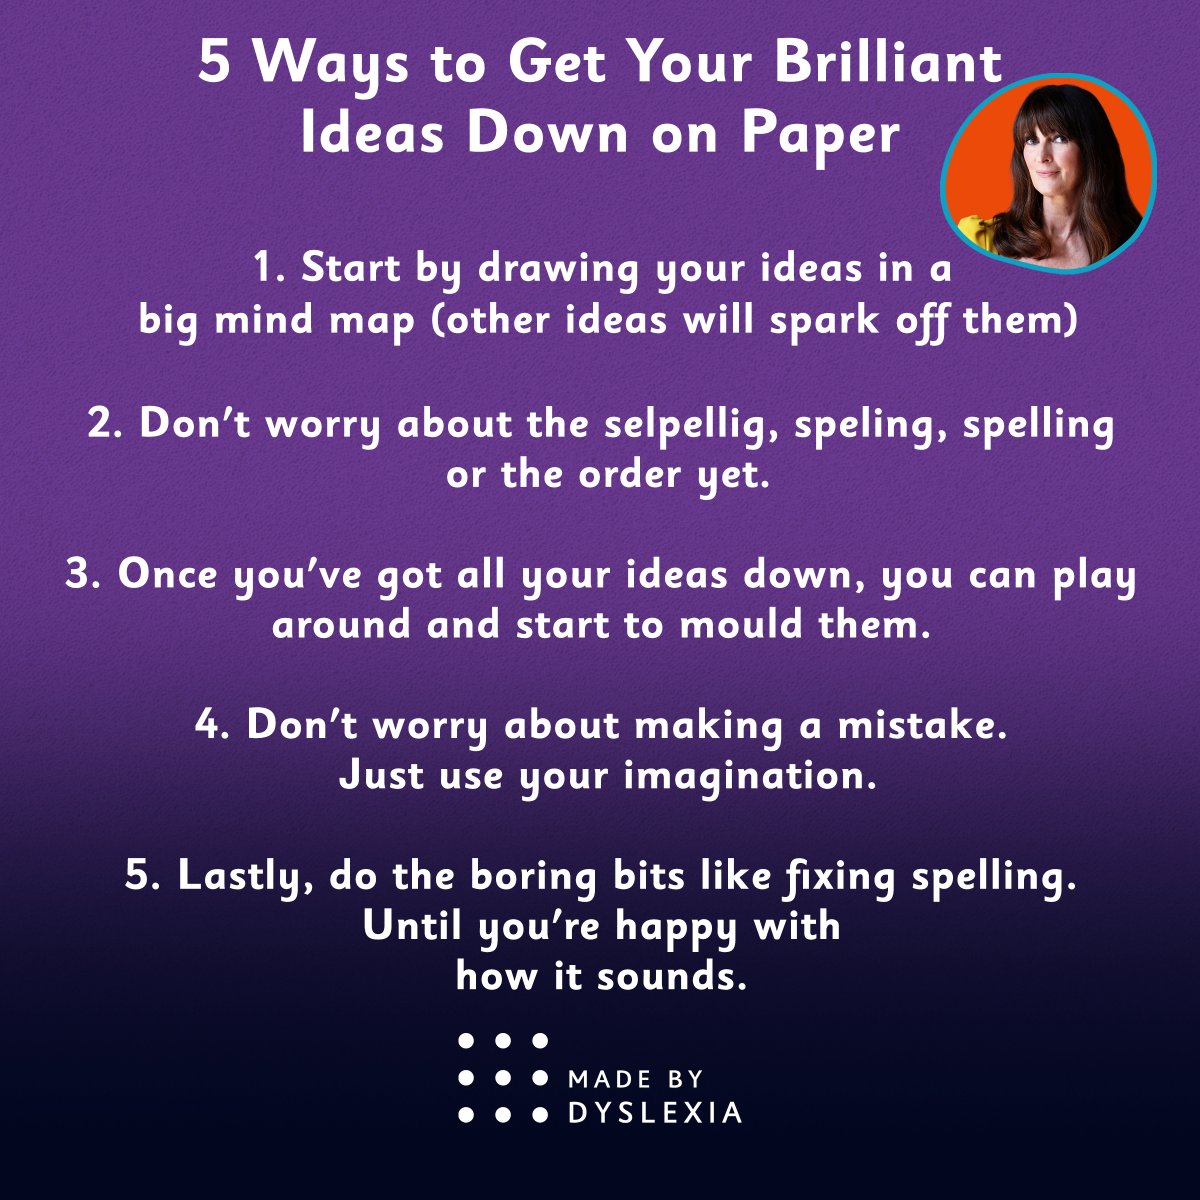 Here are 5 top tips from Tom Gates creator, and best-selling author @LizPichon , who is #MadeByDyslexia, to help get your thoughts on paper. Dyslexics have brilliant ideas. But because our brains process information differently, we often struggle to get our ideas down on paper✍️